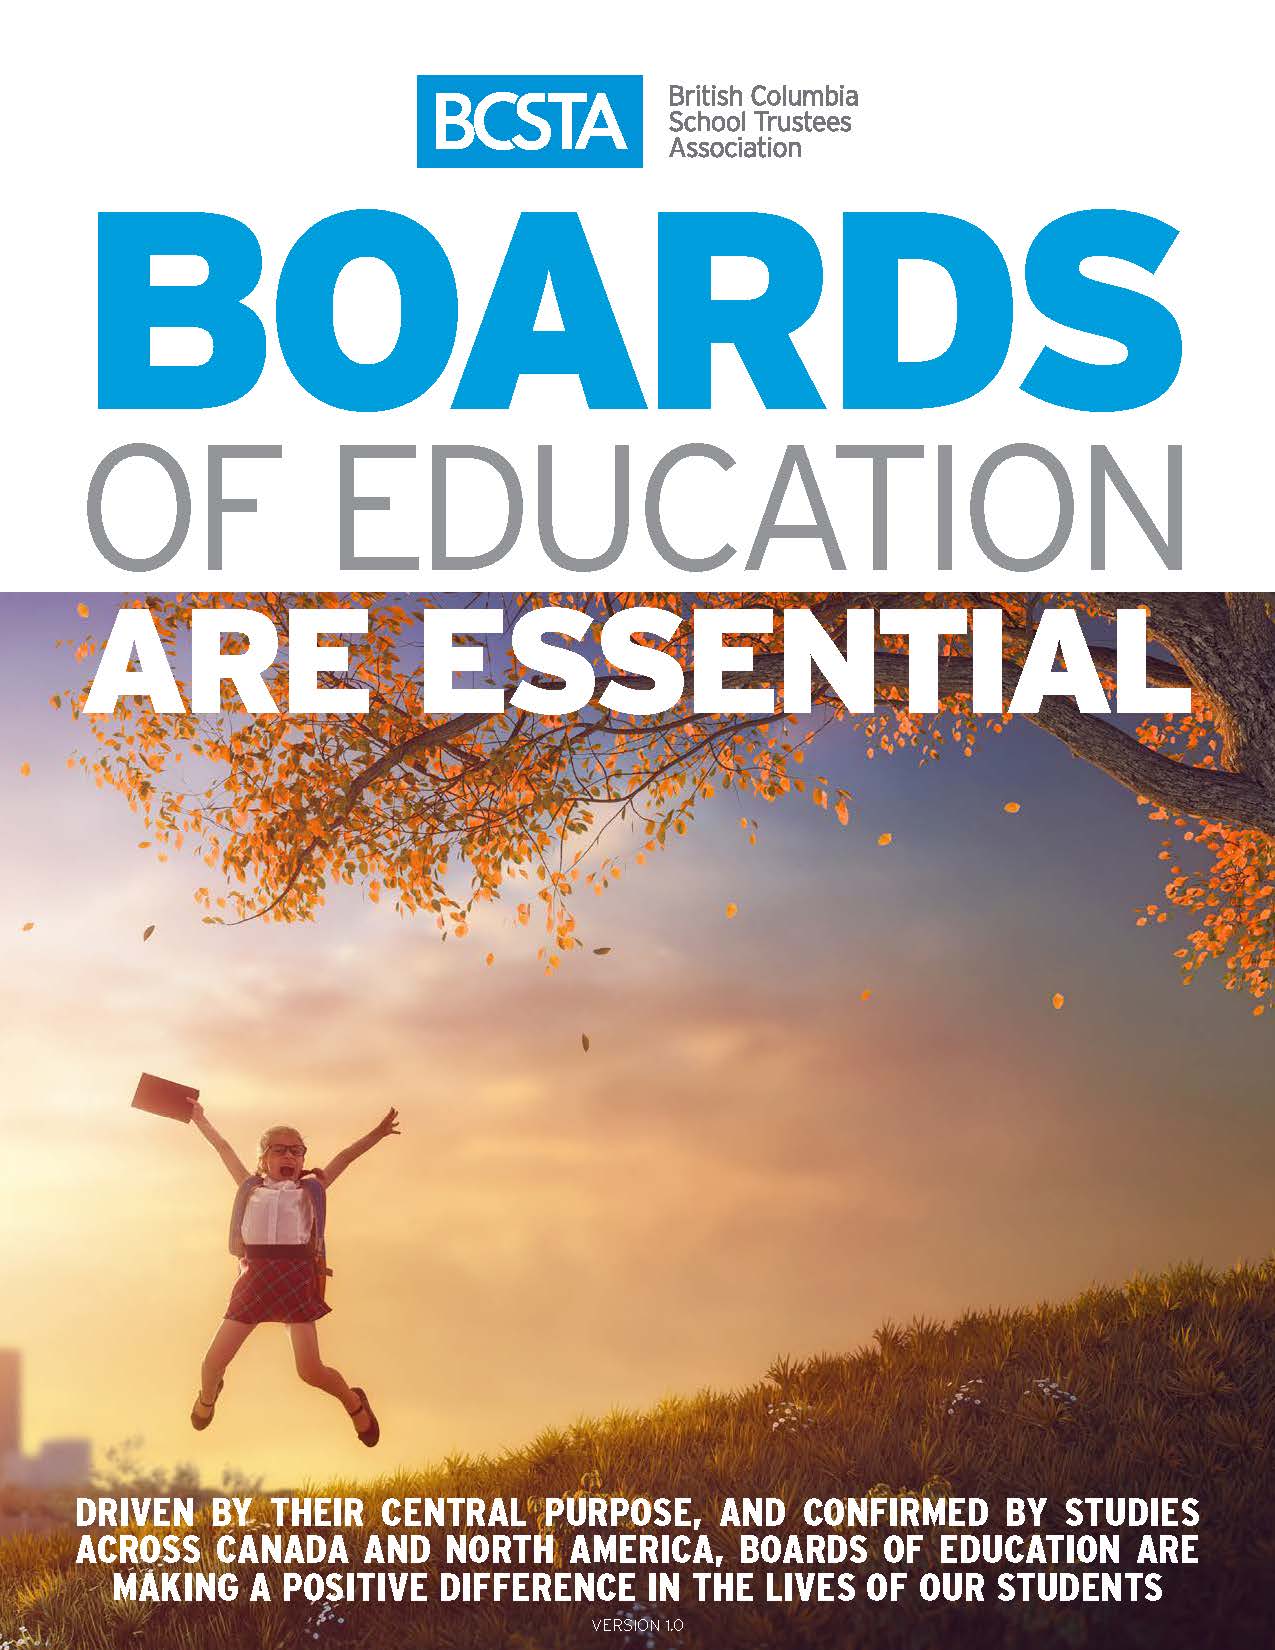 BCSTA-Boards-of-Education-are-Essential-2019_Page_1.jpg